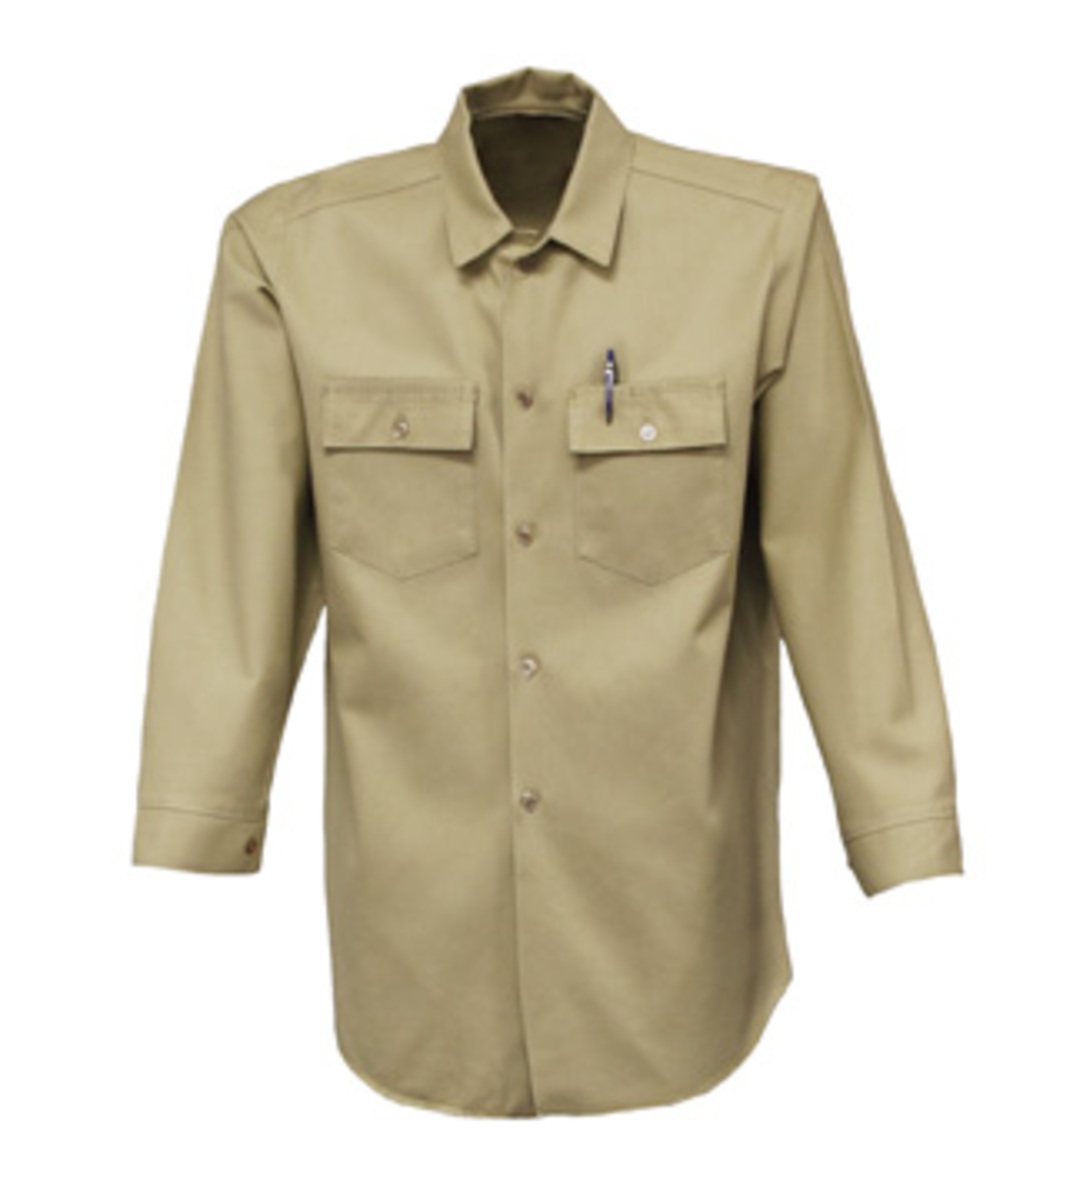 Stanco Safety Products™ Size 2X Tan Indura® UltraSoft® Arc Rated Flame Resistant Shirt With Button Closure